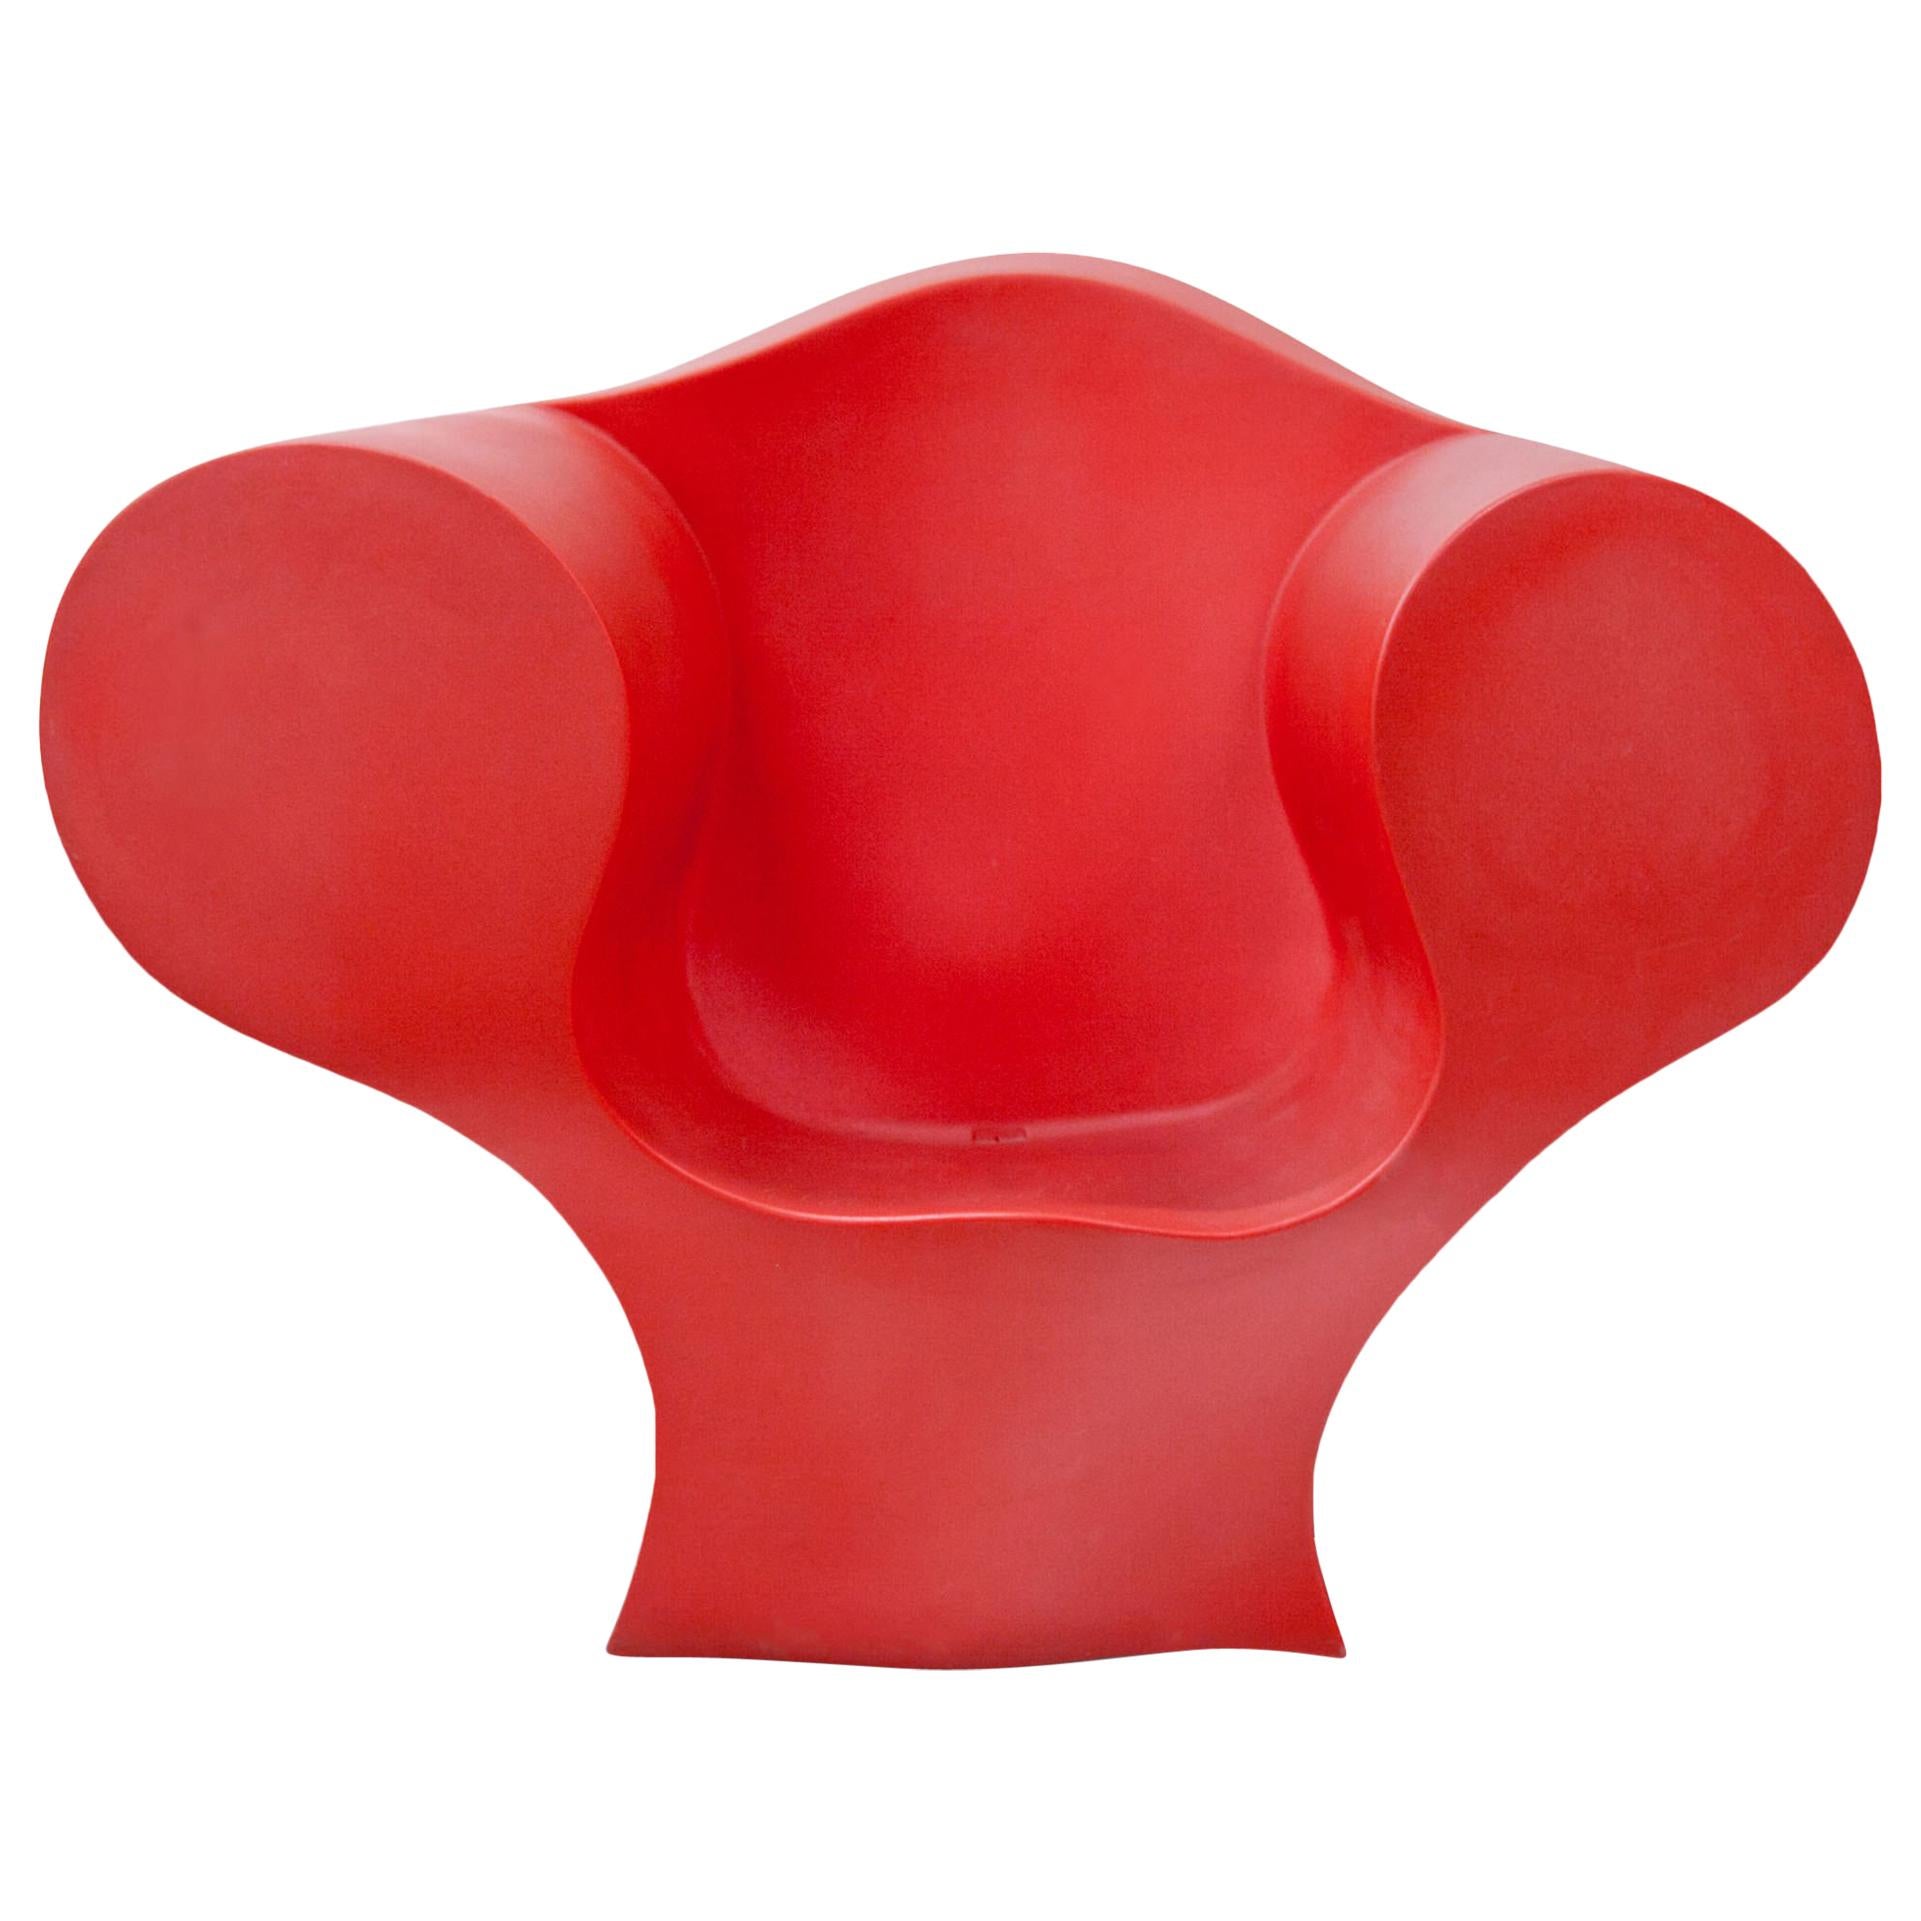 Big-E, Armchair by Ron Arad for Moroso, Italy, 1990s